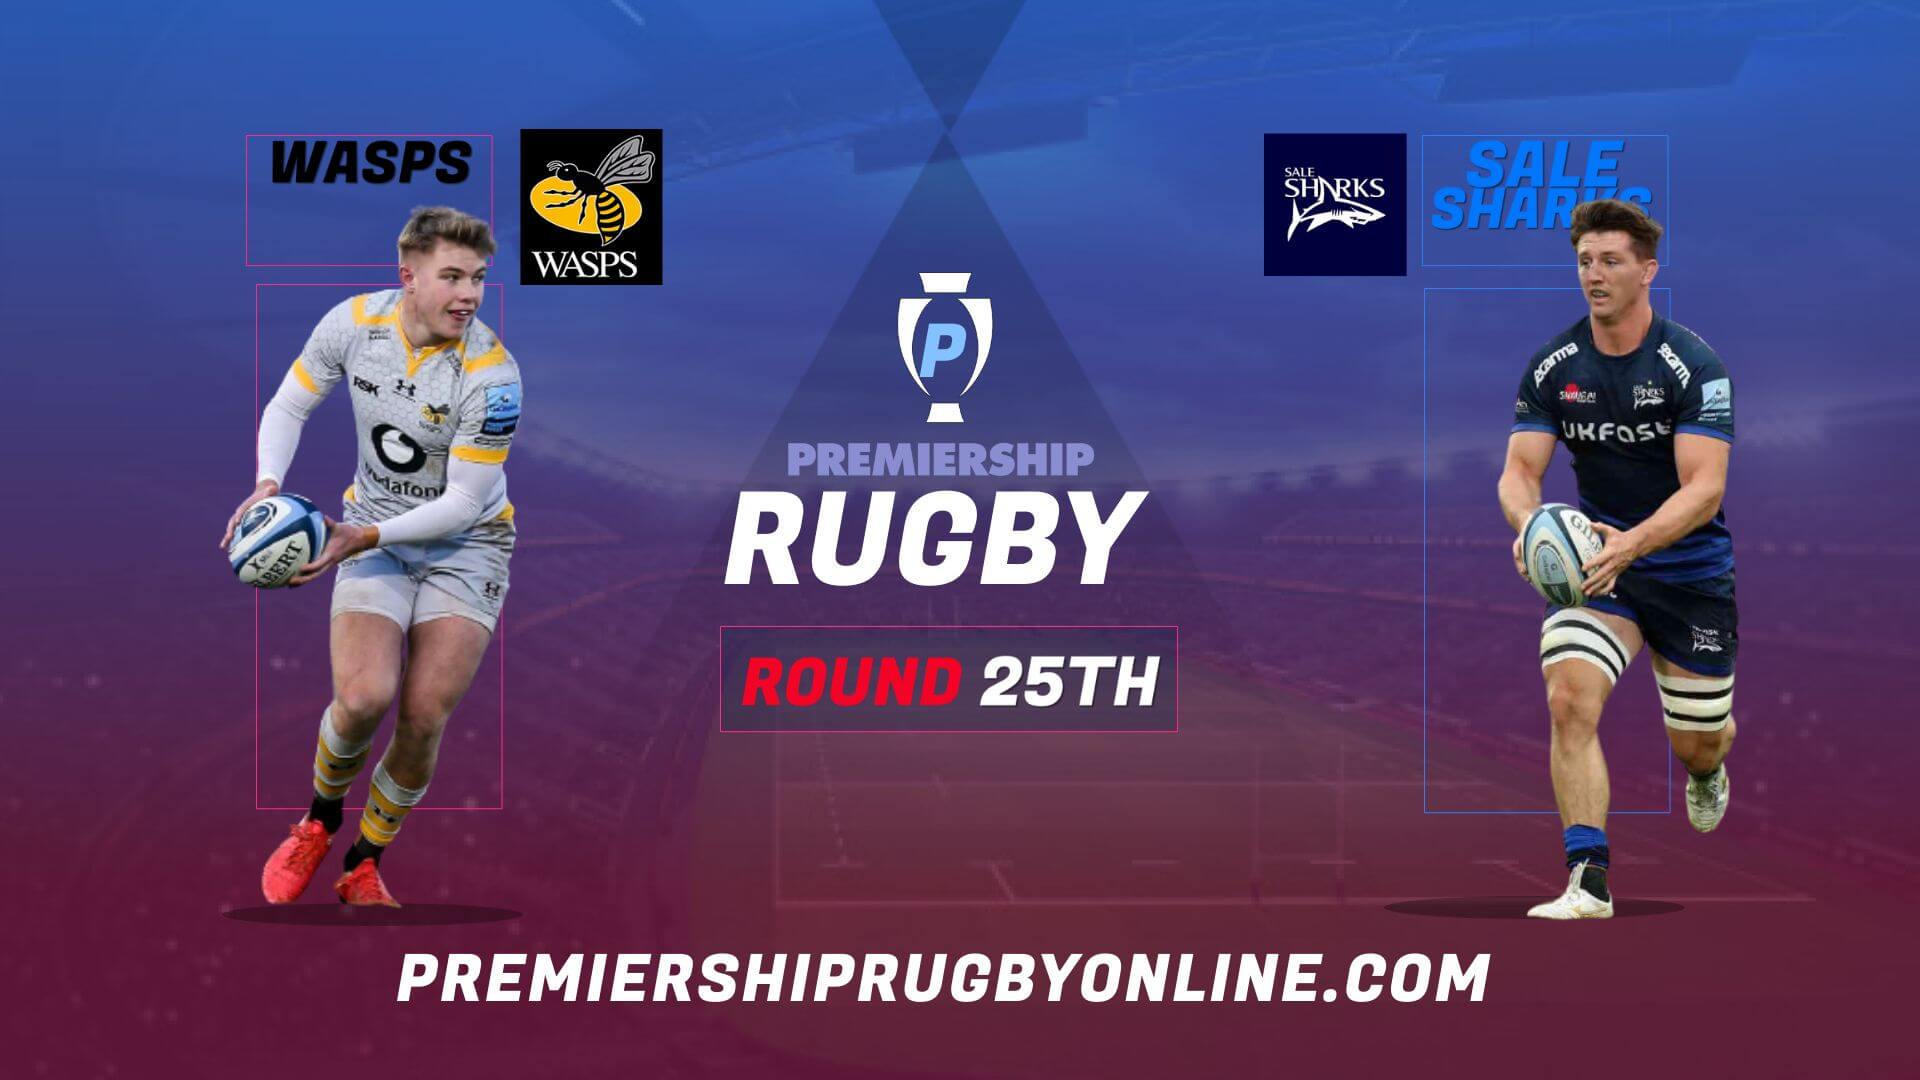 Wasps Vs Sale Sharks Live Stream 2021-22 | Premiership Rugby Round 25